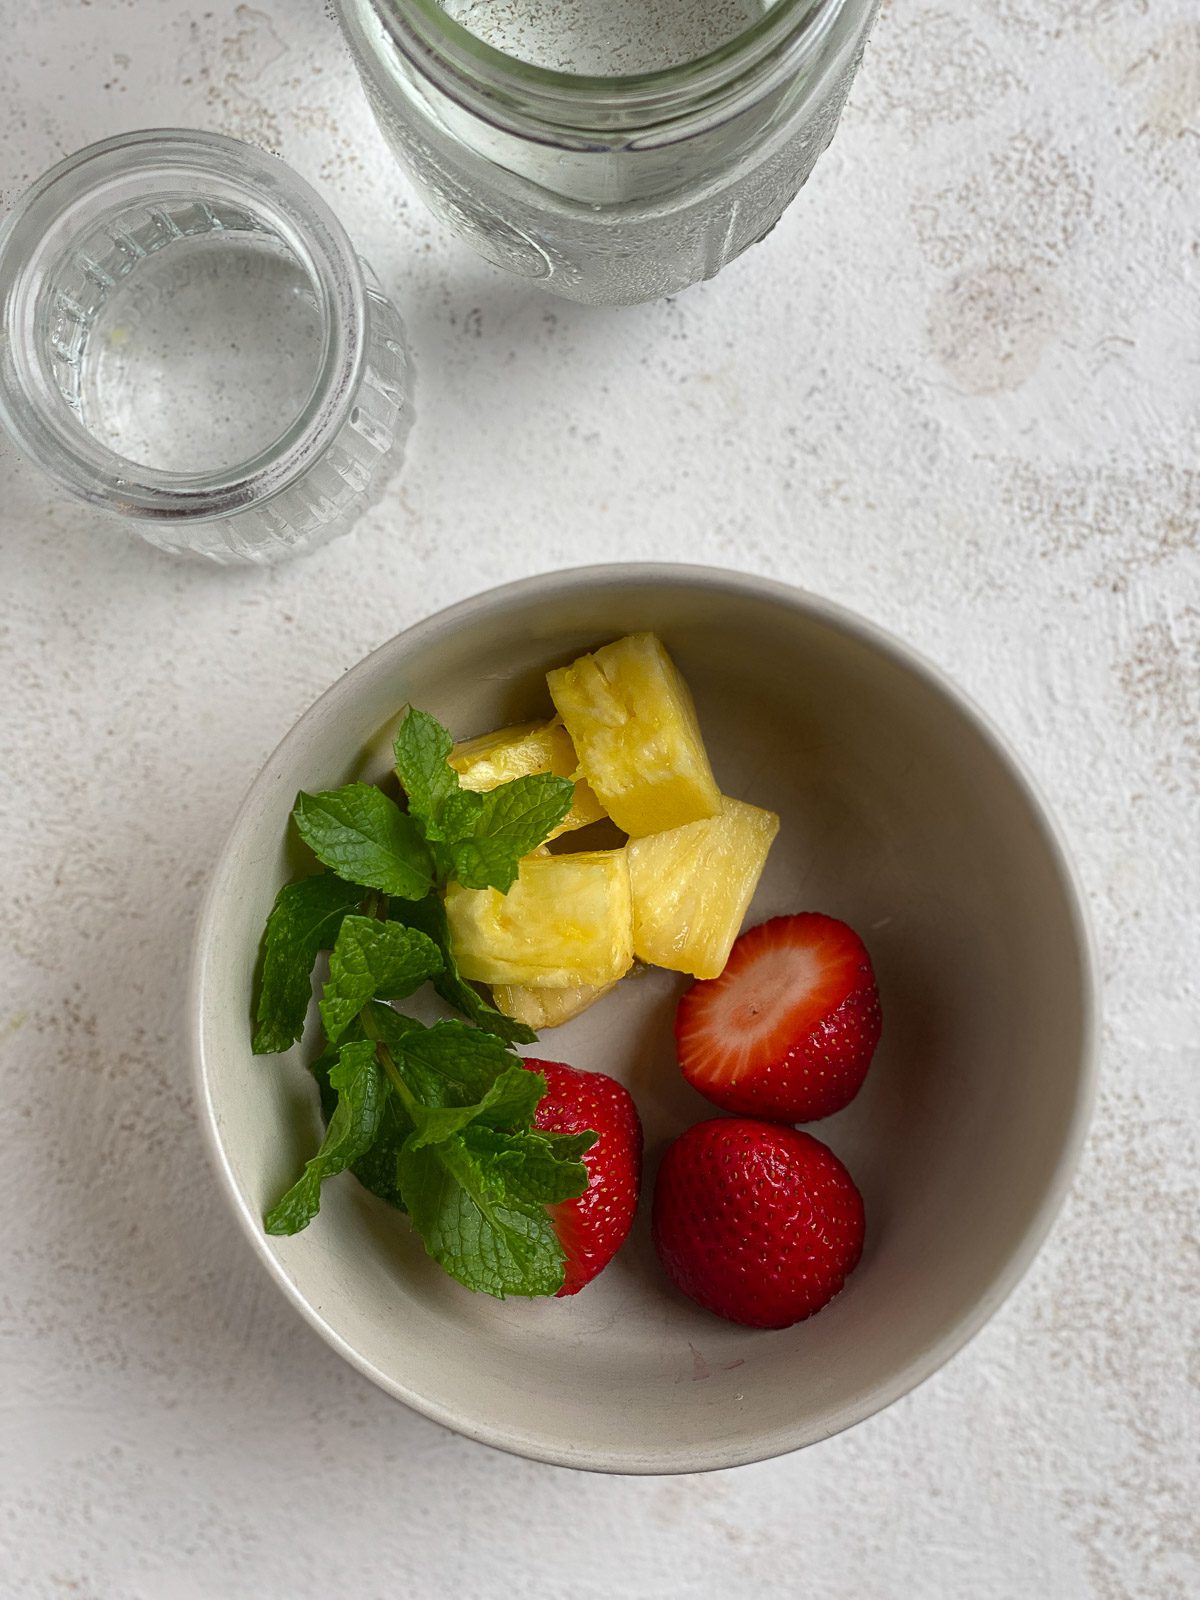 ingredients for Strawberry Pineapple Mocktail in a bowl on a white surface